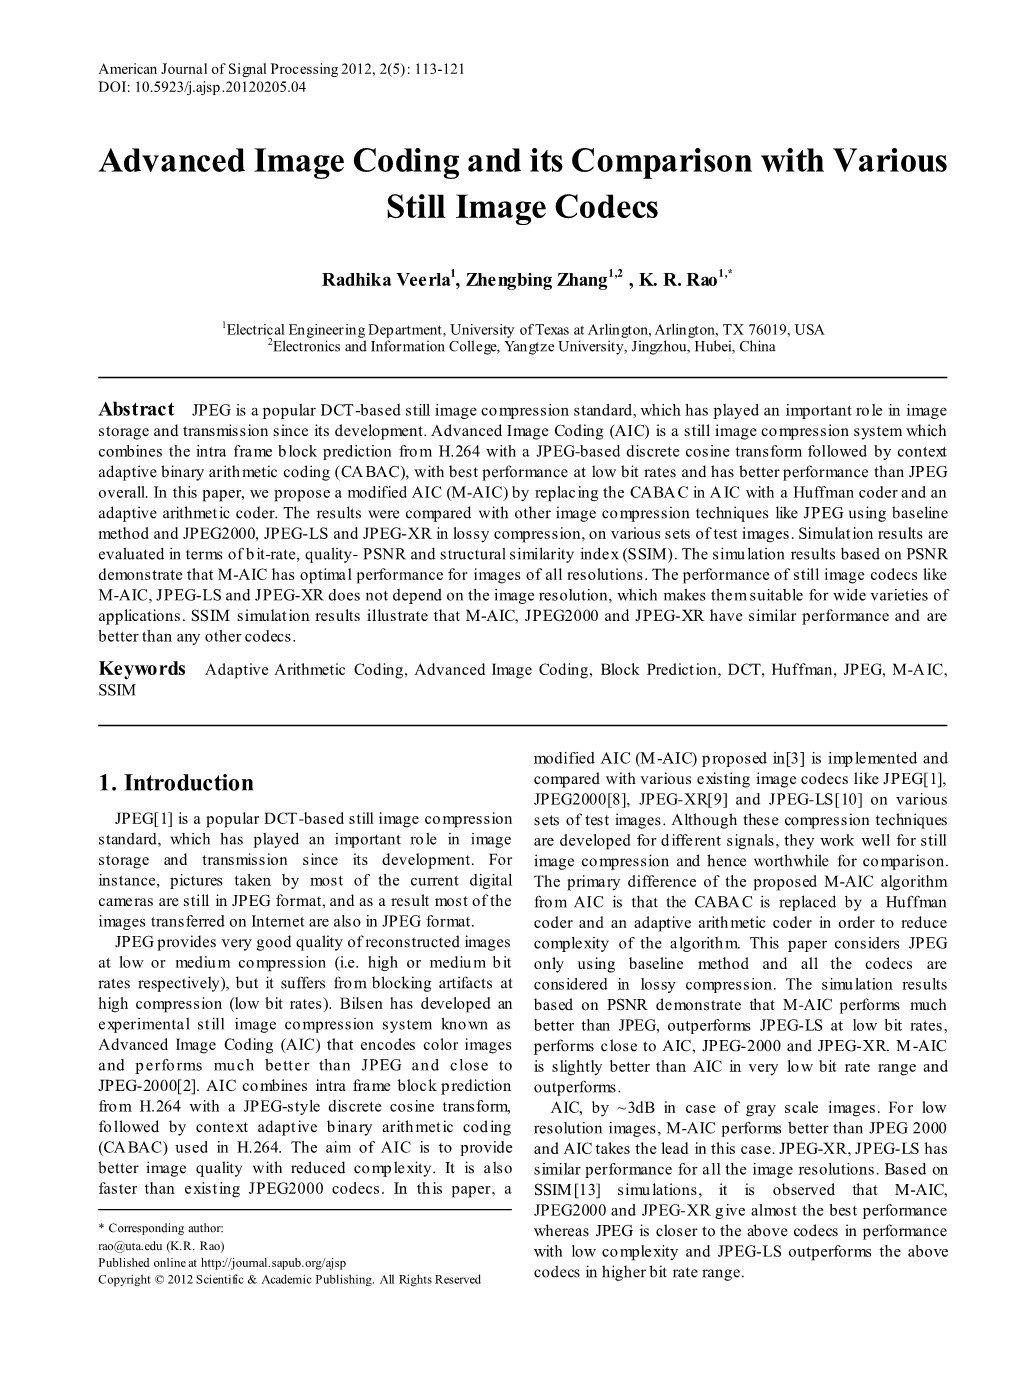 Advanced Image Coding and Its Comparison with Various Still Image Codecs